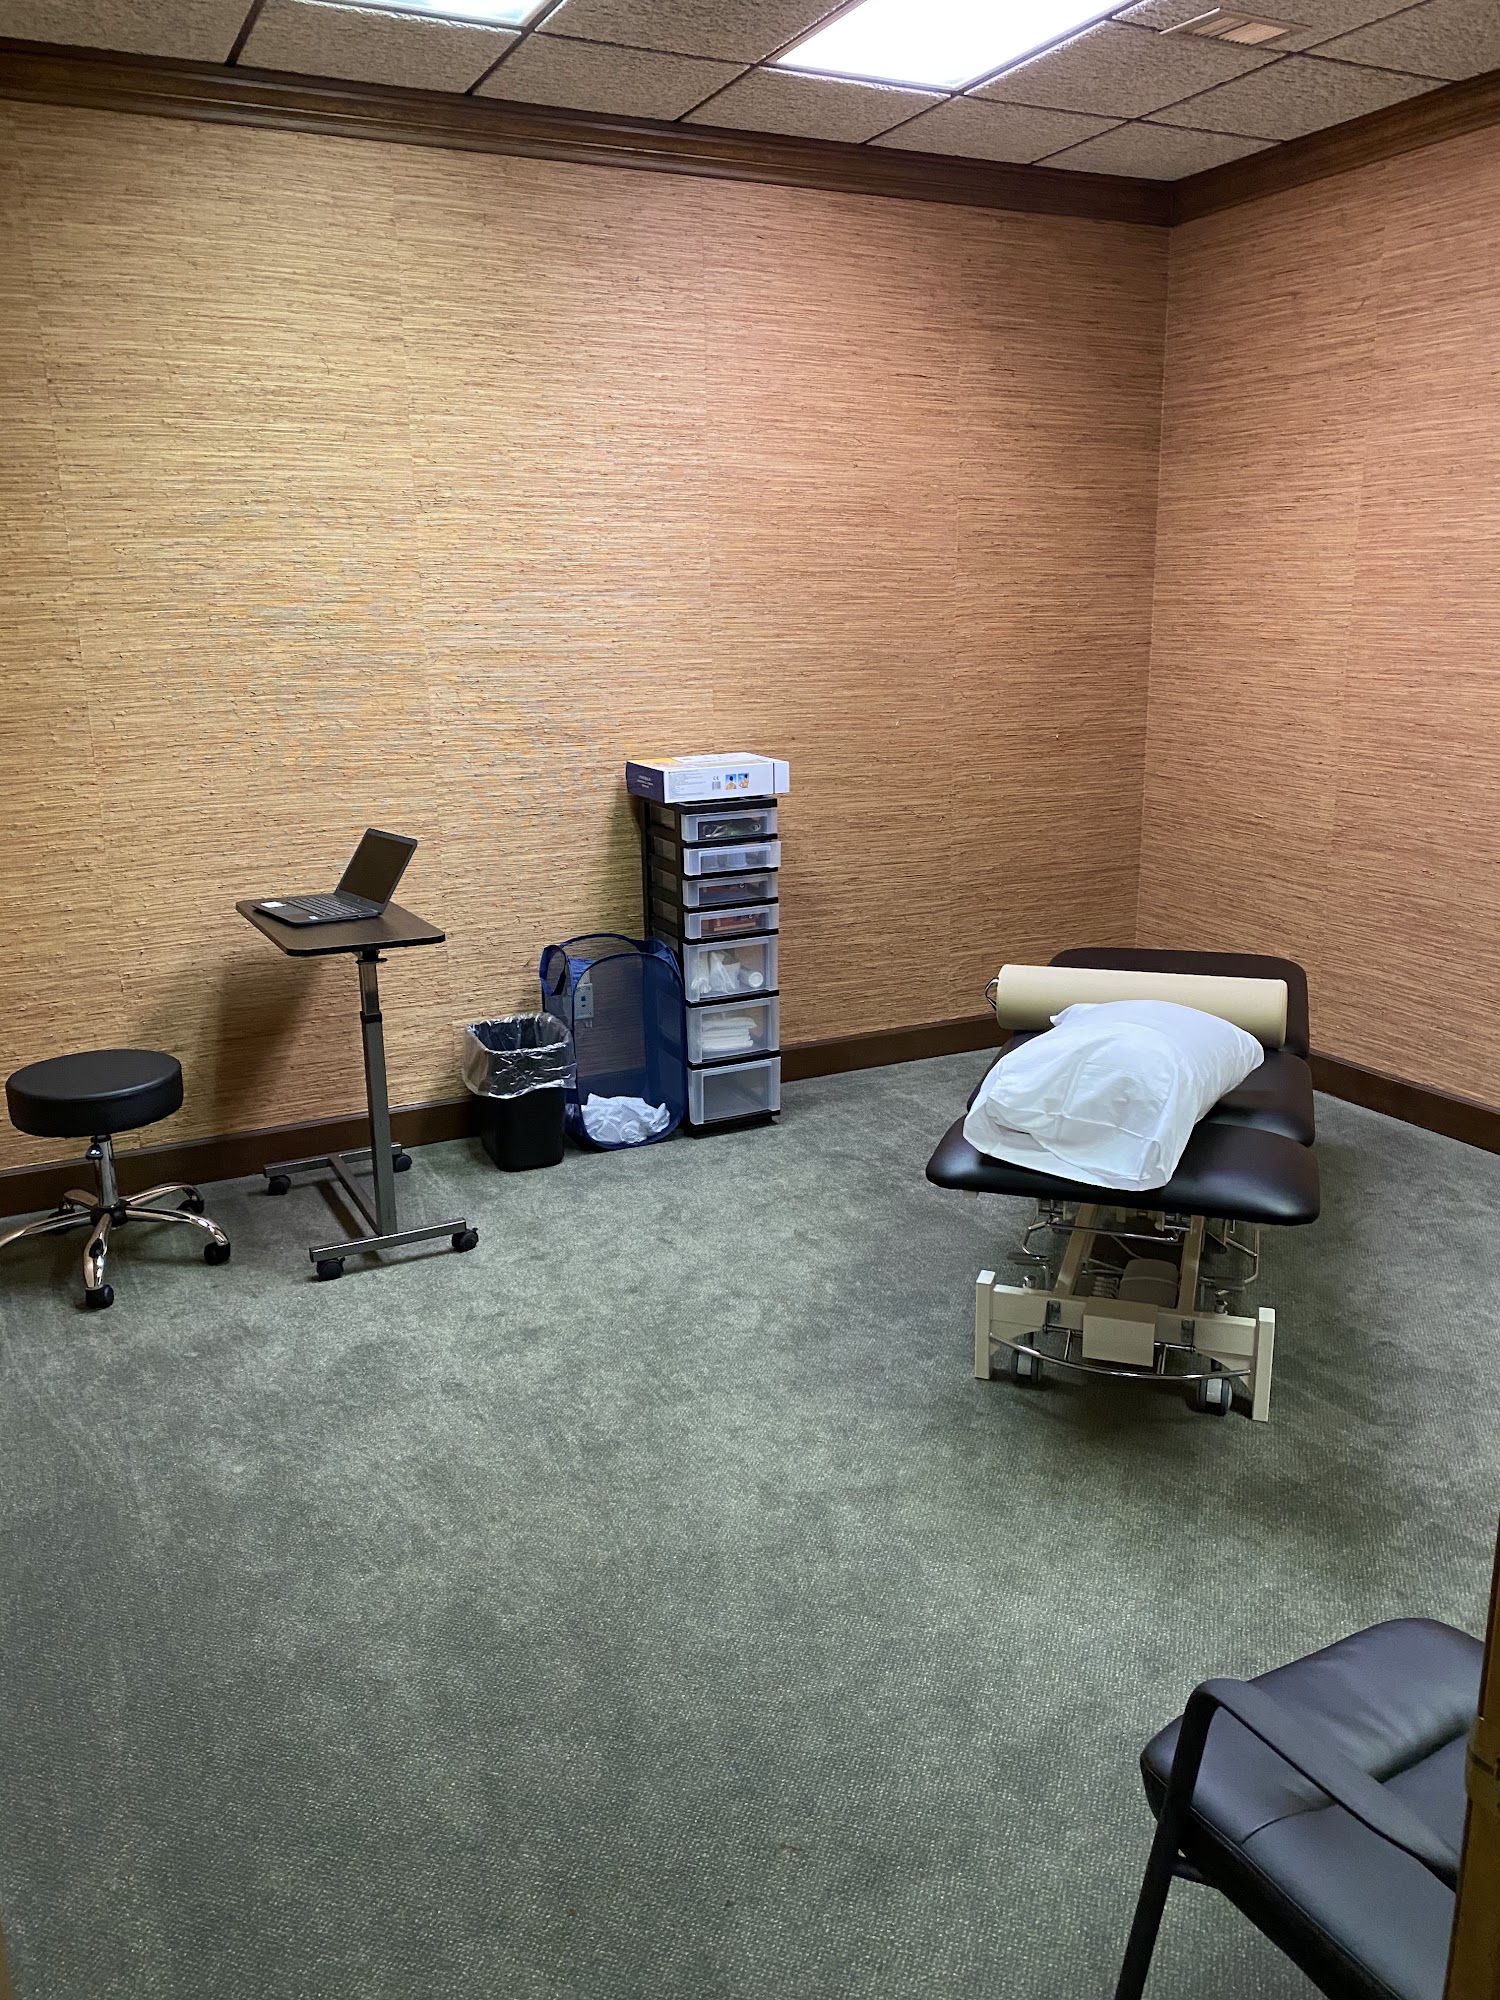 Back to You Osteopractic Physical Therapy & Rehabilitation 21316 Mack Ave, Grosse Pointe Woods Michigan 48236